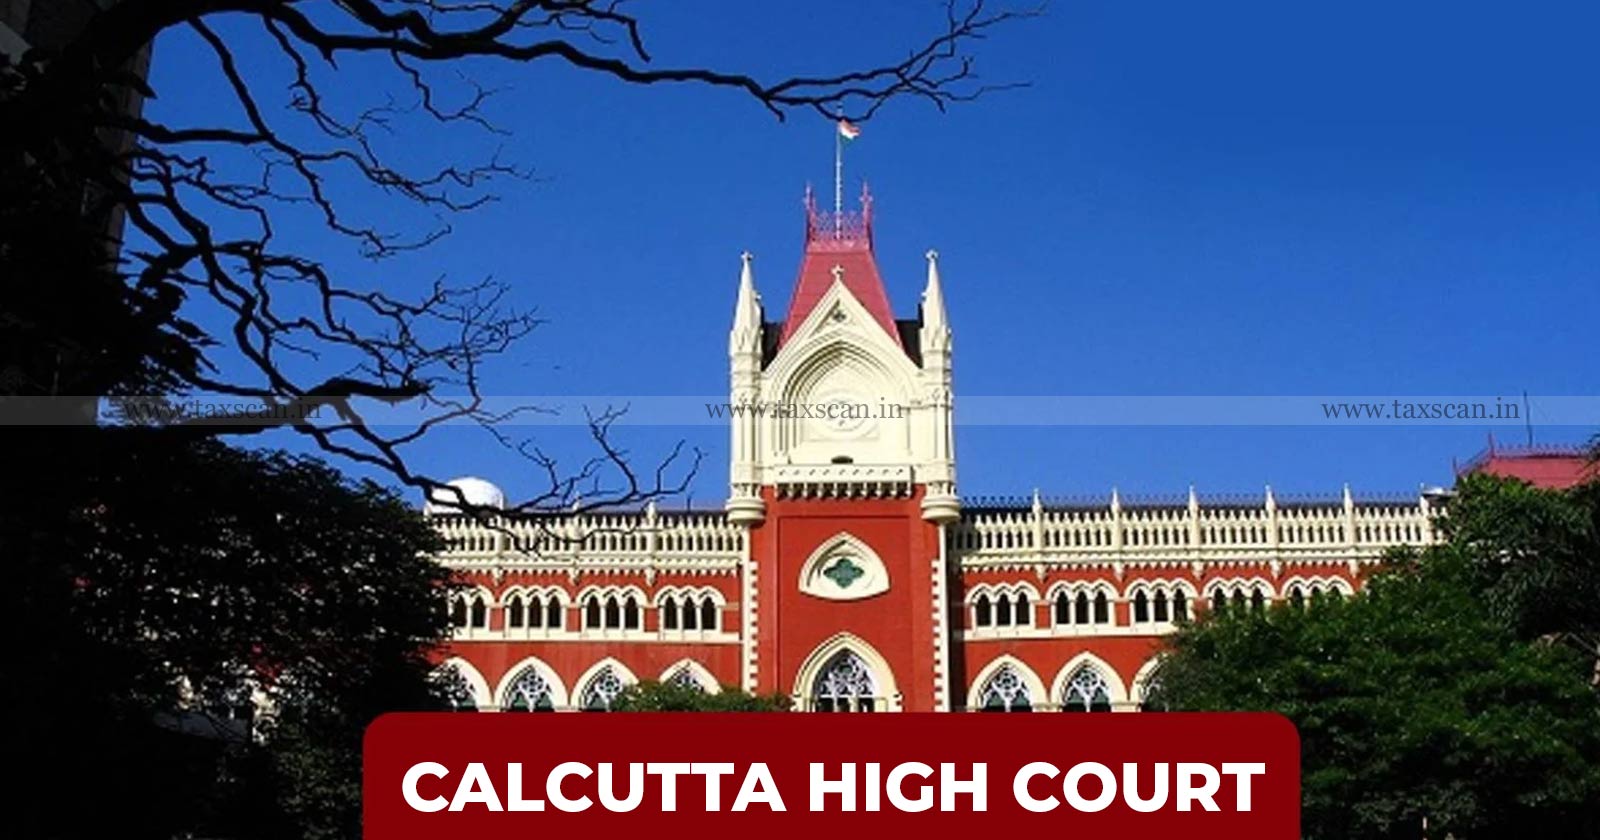 Imposition of Excise Duty - Incineration - Lean Gas used - Generation of Electricity-Calcutta HC - Ex Parte - TAXSCAN